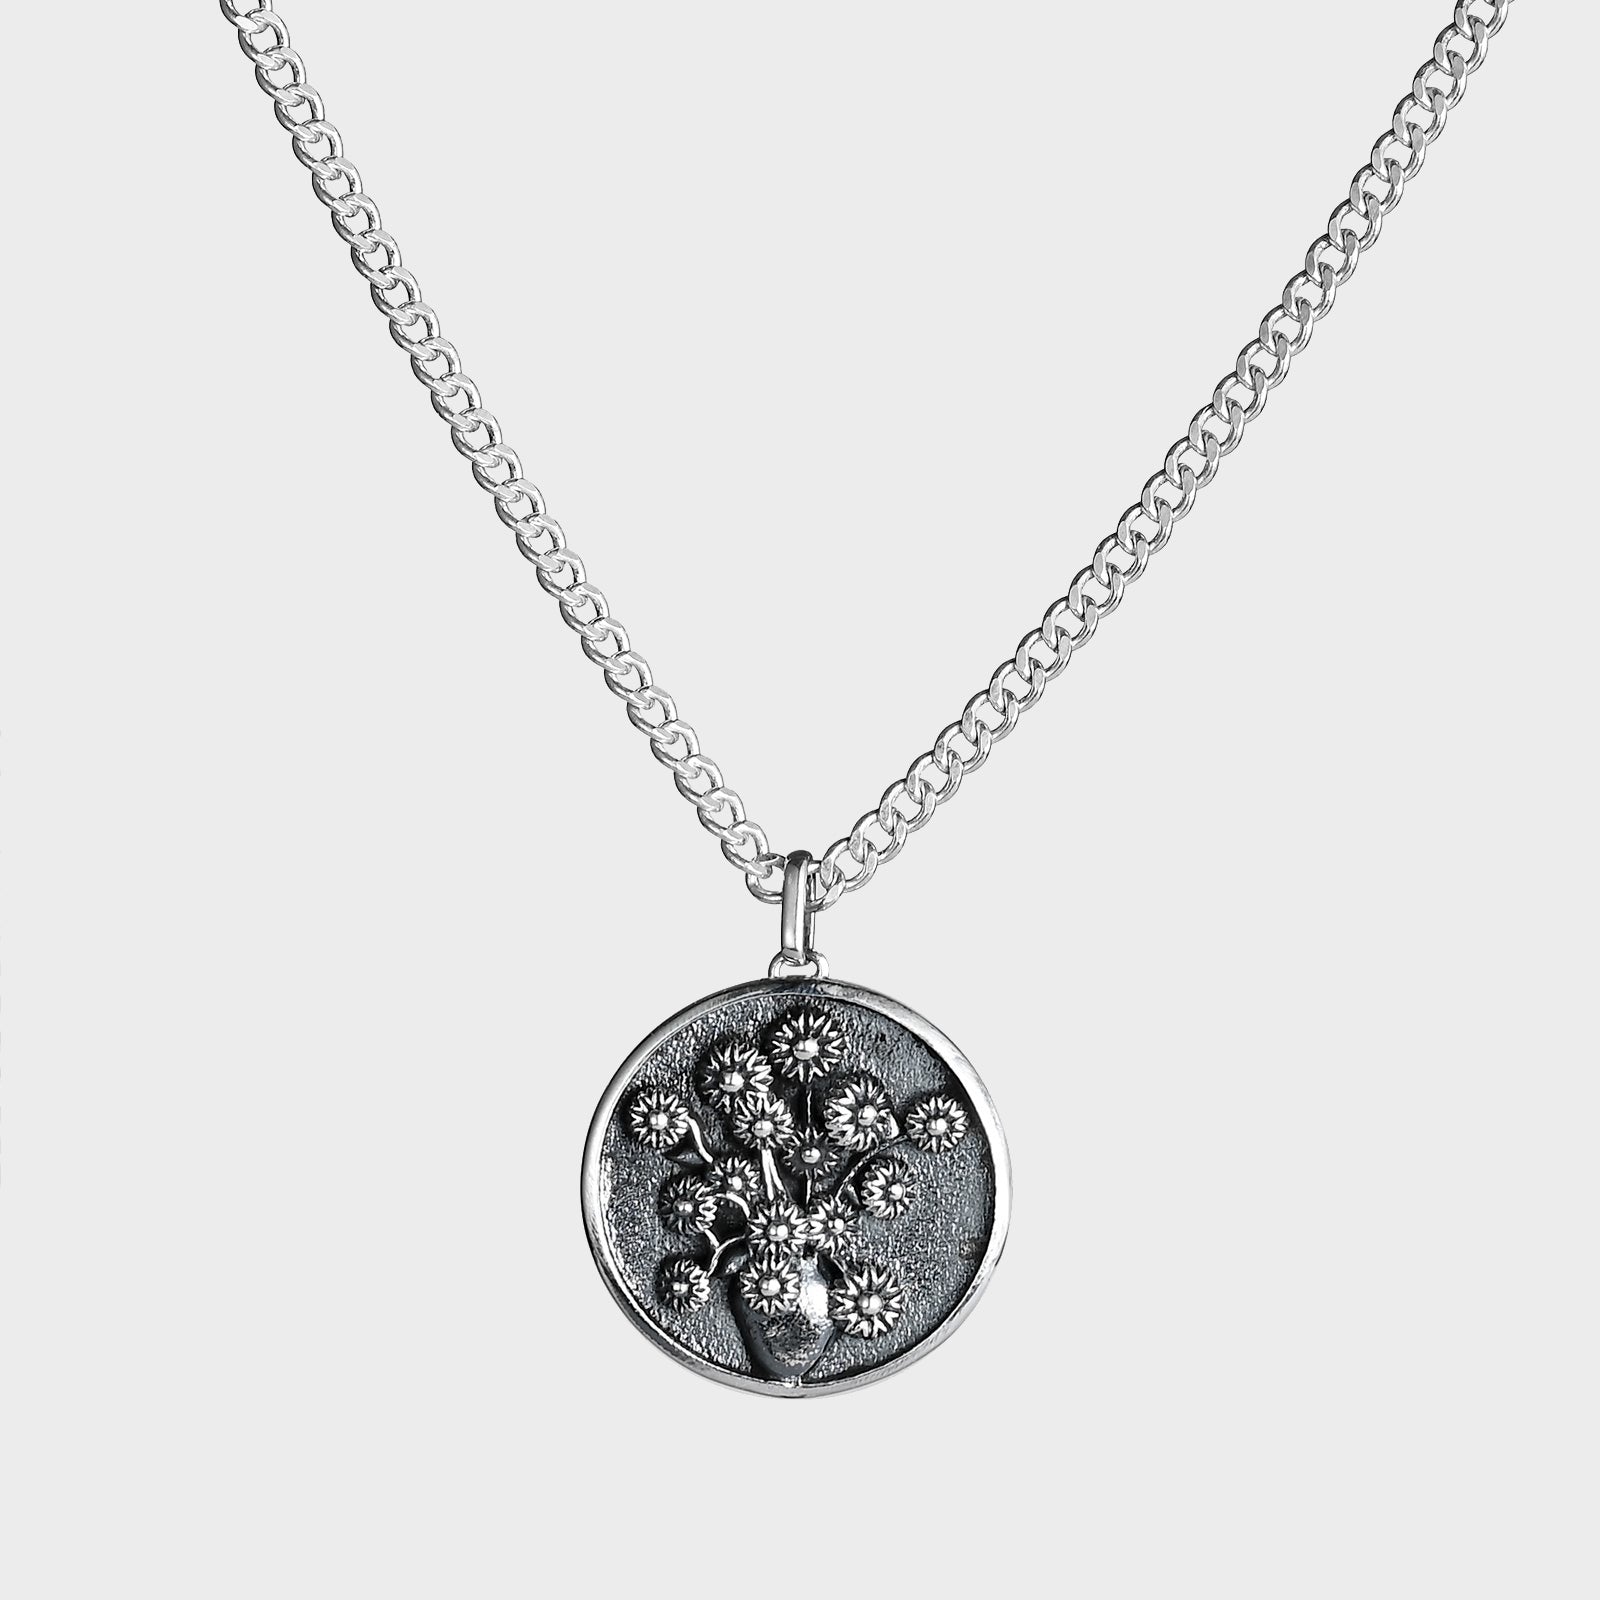 The Arles Sunflowers - Necklace